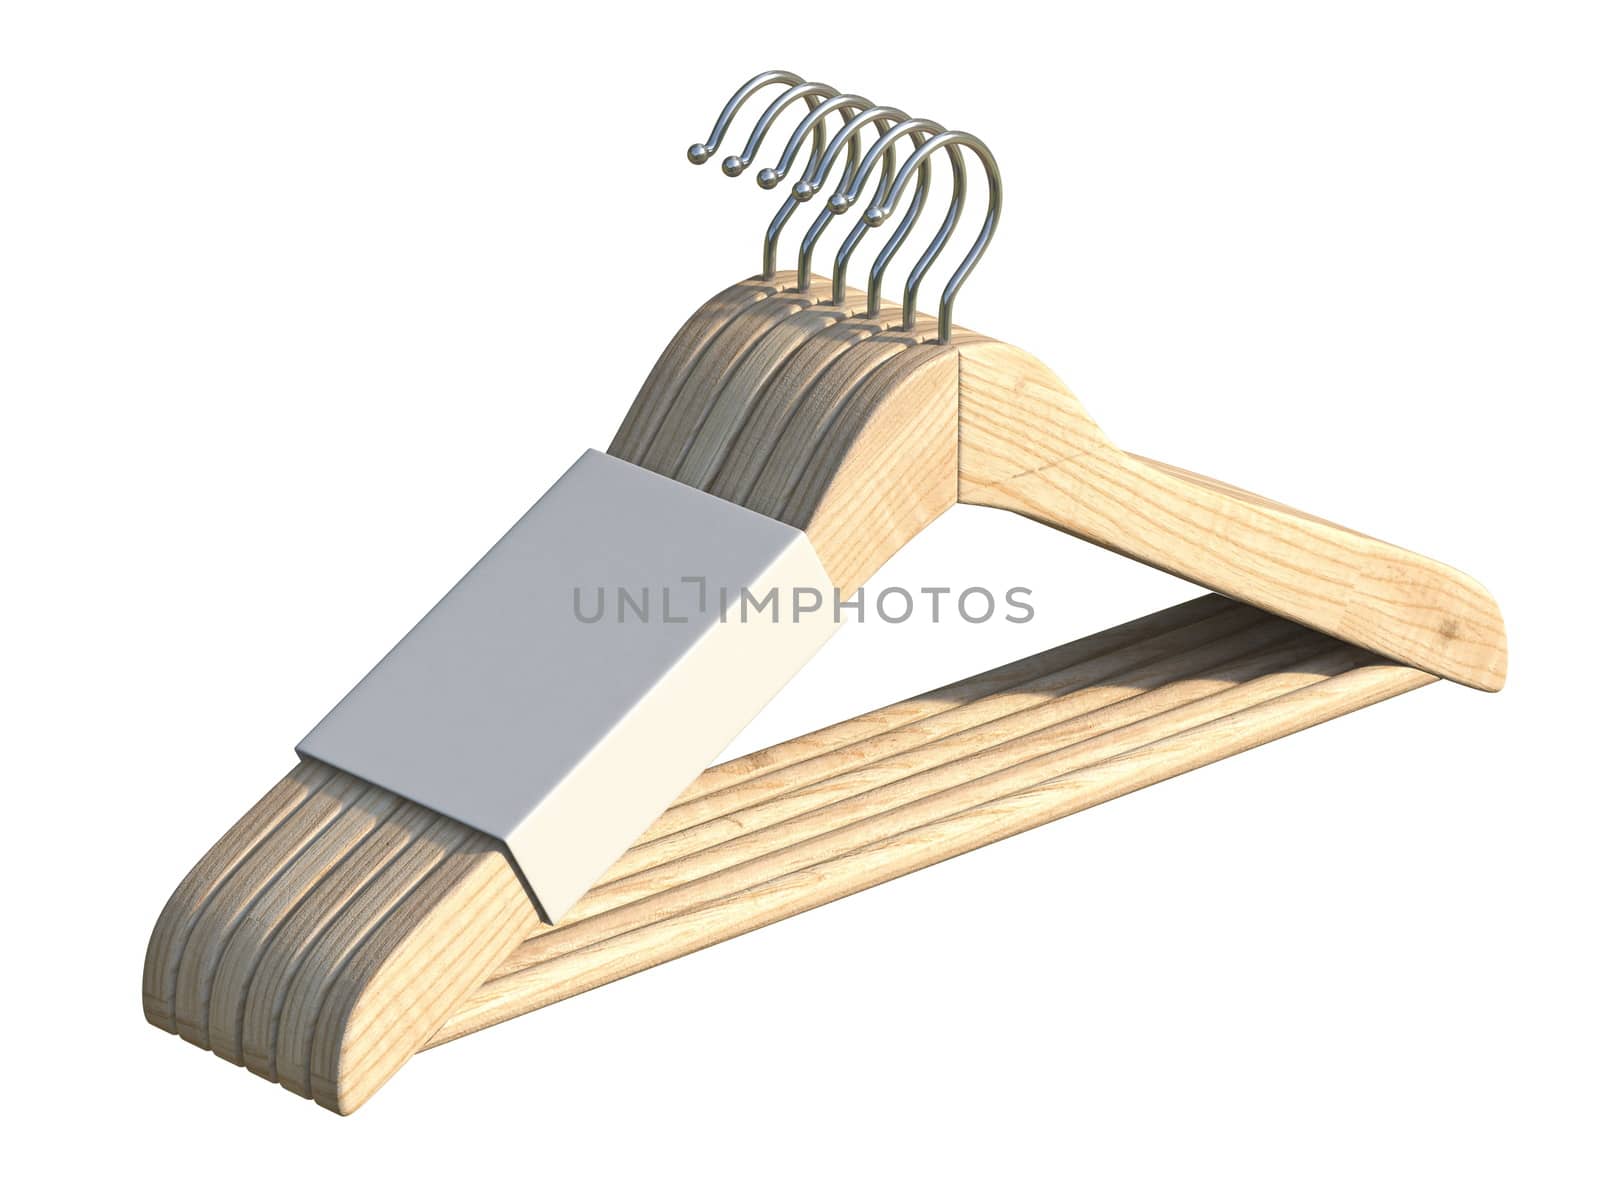 Cloth hangers with white package template 3D render illustration isolated on white background